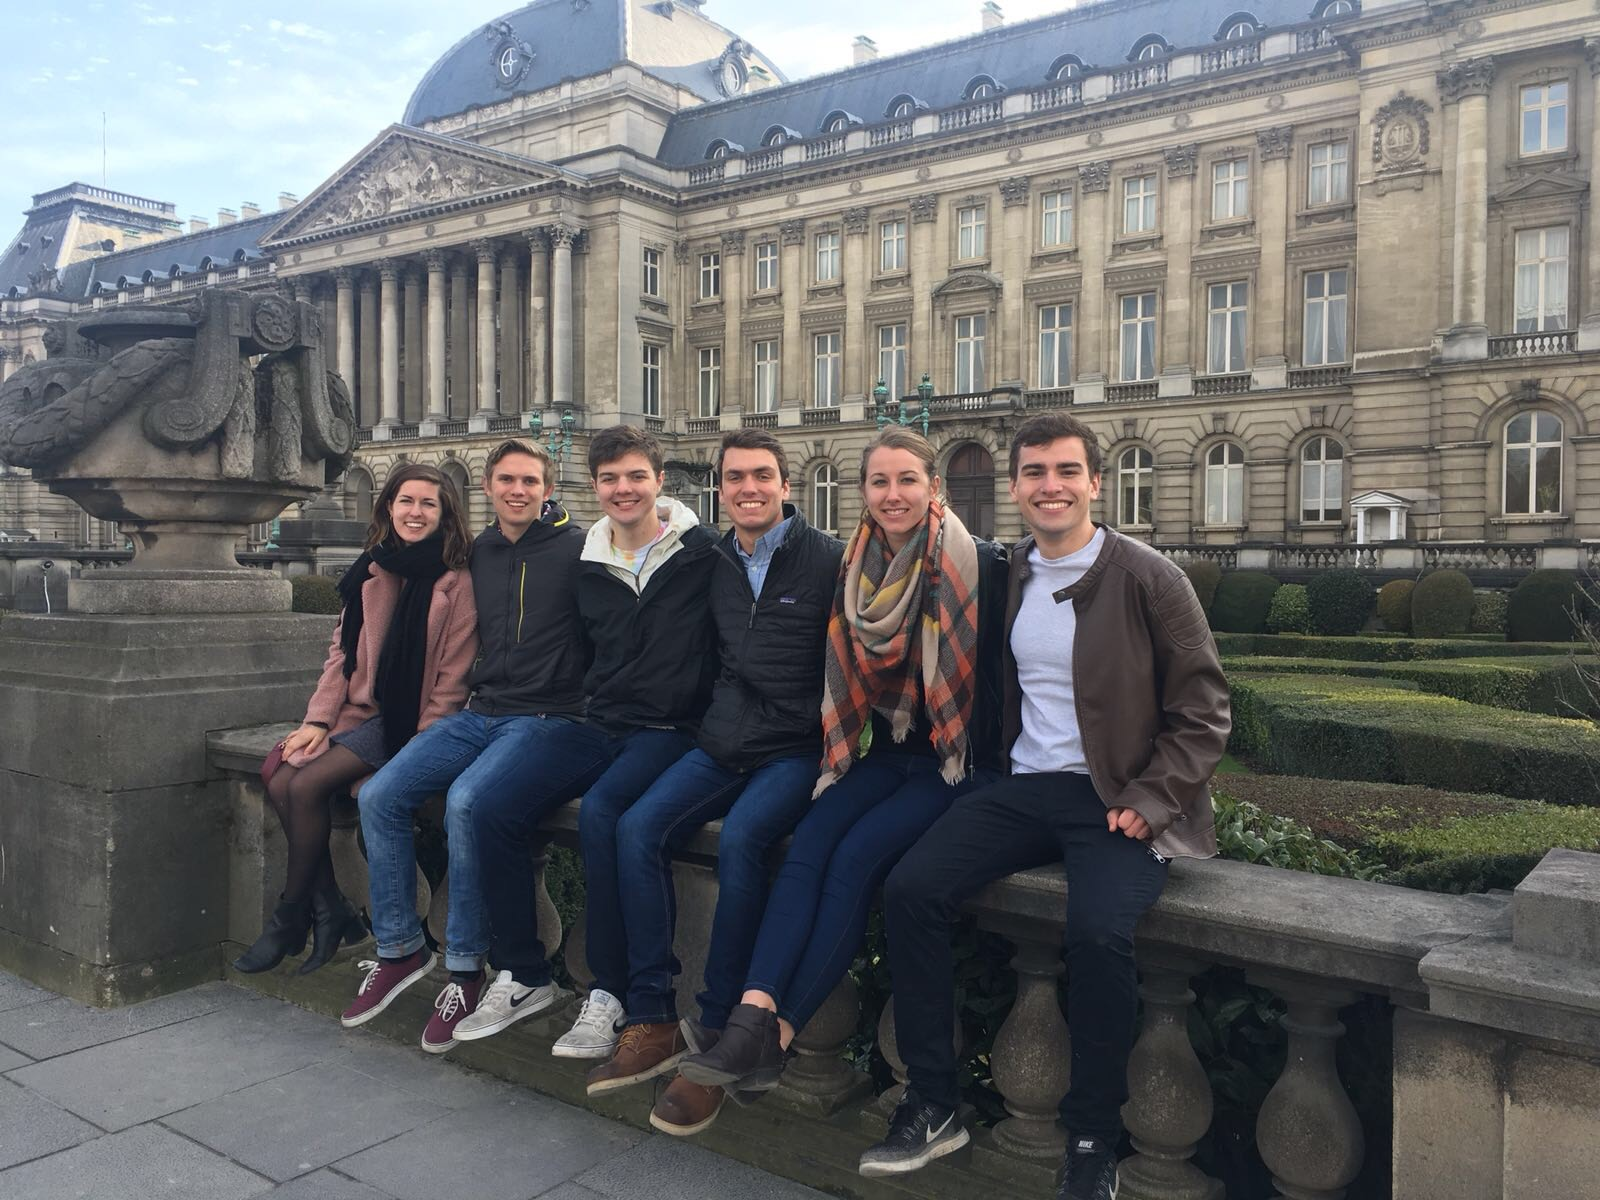 Cameron Lackey with friends in front of the Royal Palace in Brussels, Belgium